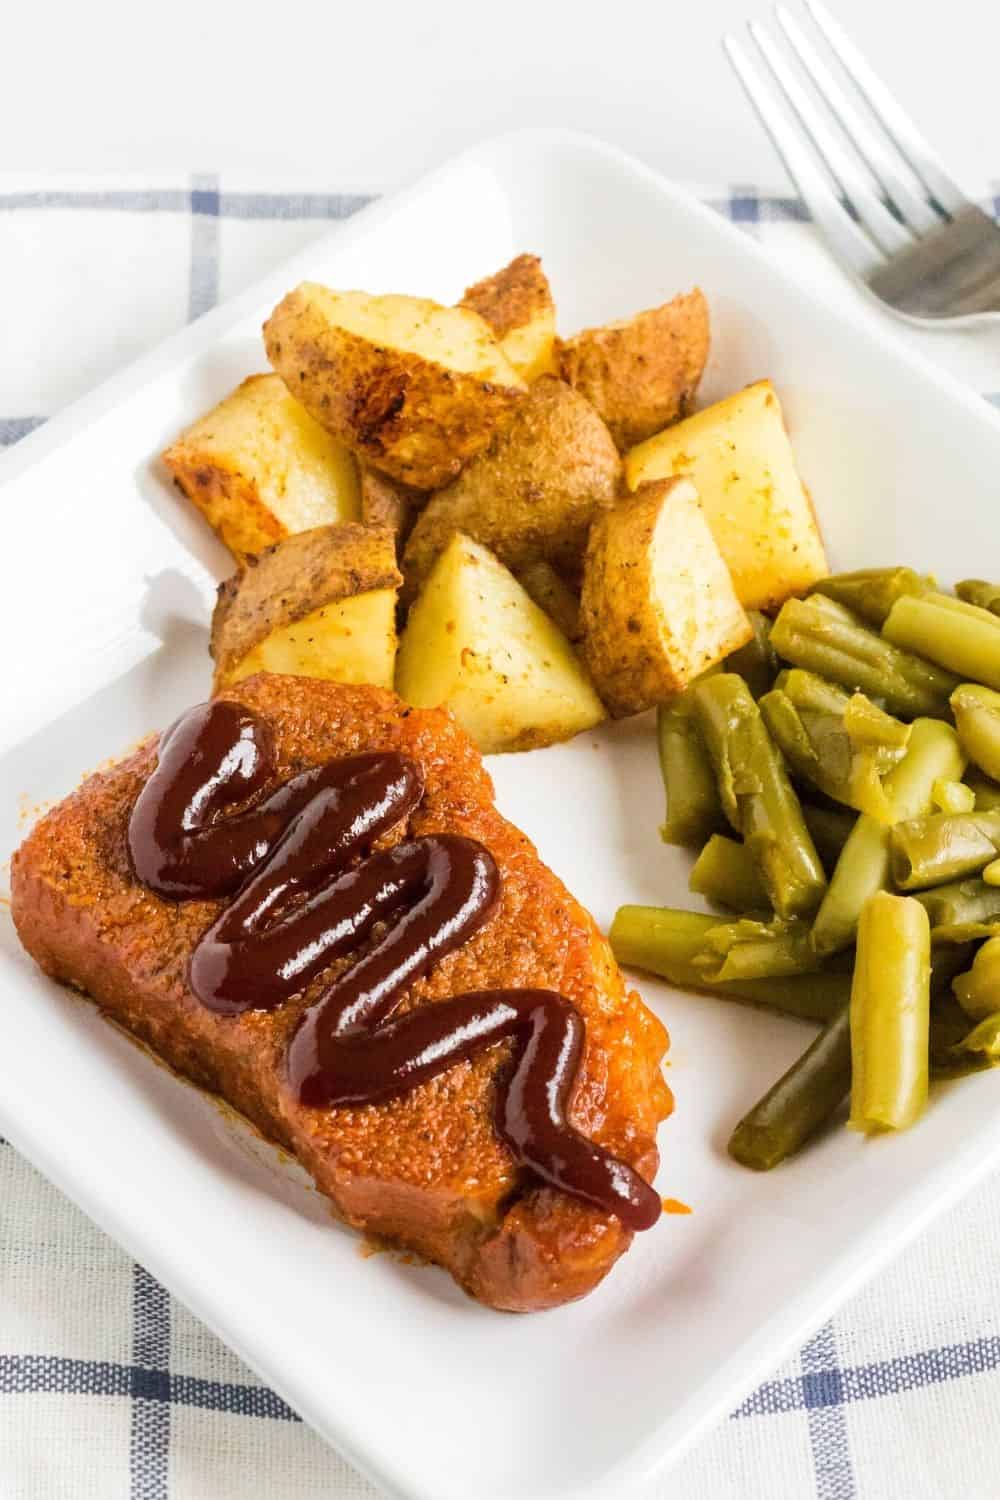 pressure cooker pork chop with bbq sauce, with side dishes of roasted potatoes and green beans